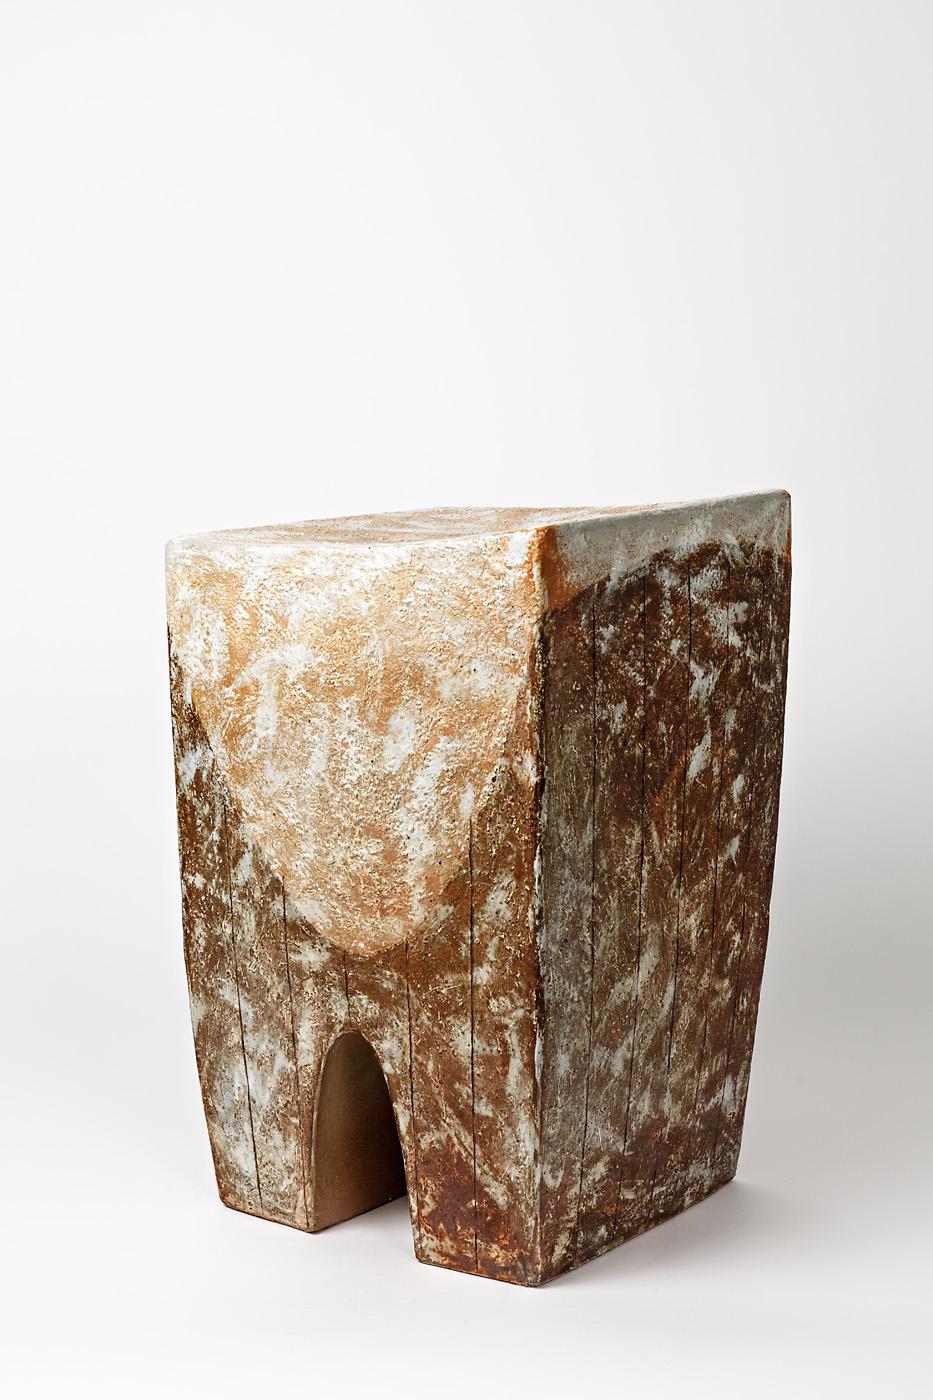 French Stoneware Stool by M. Georg, 2017